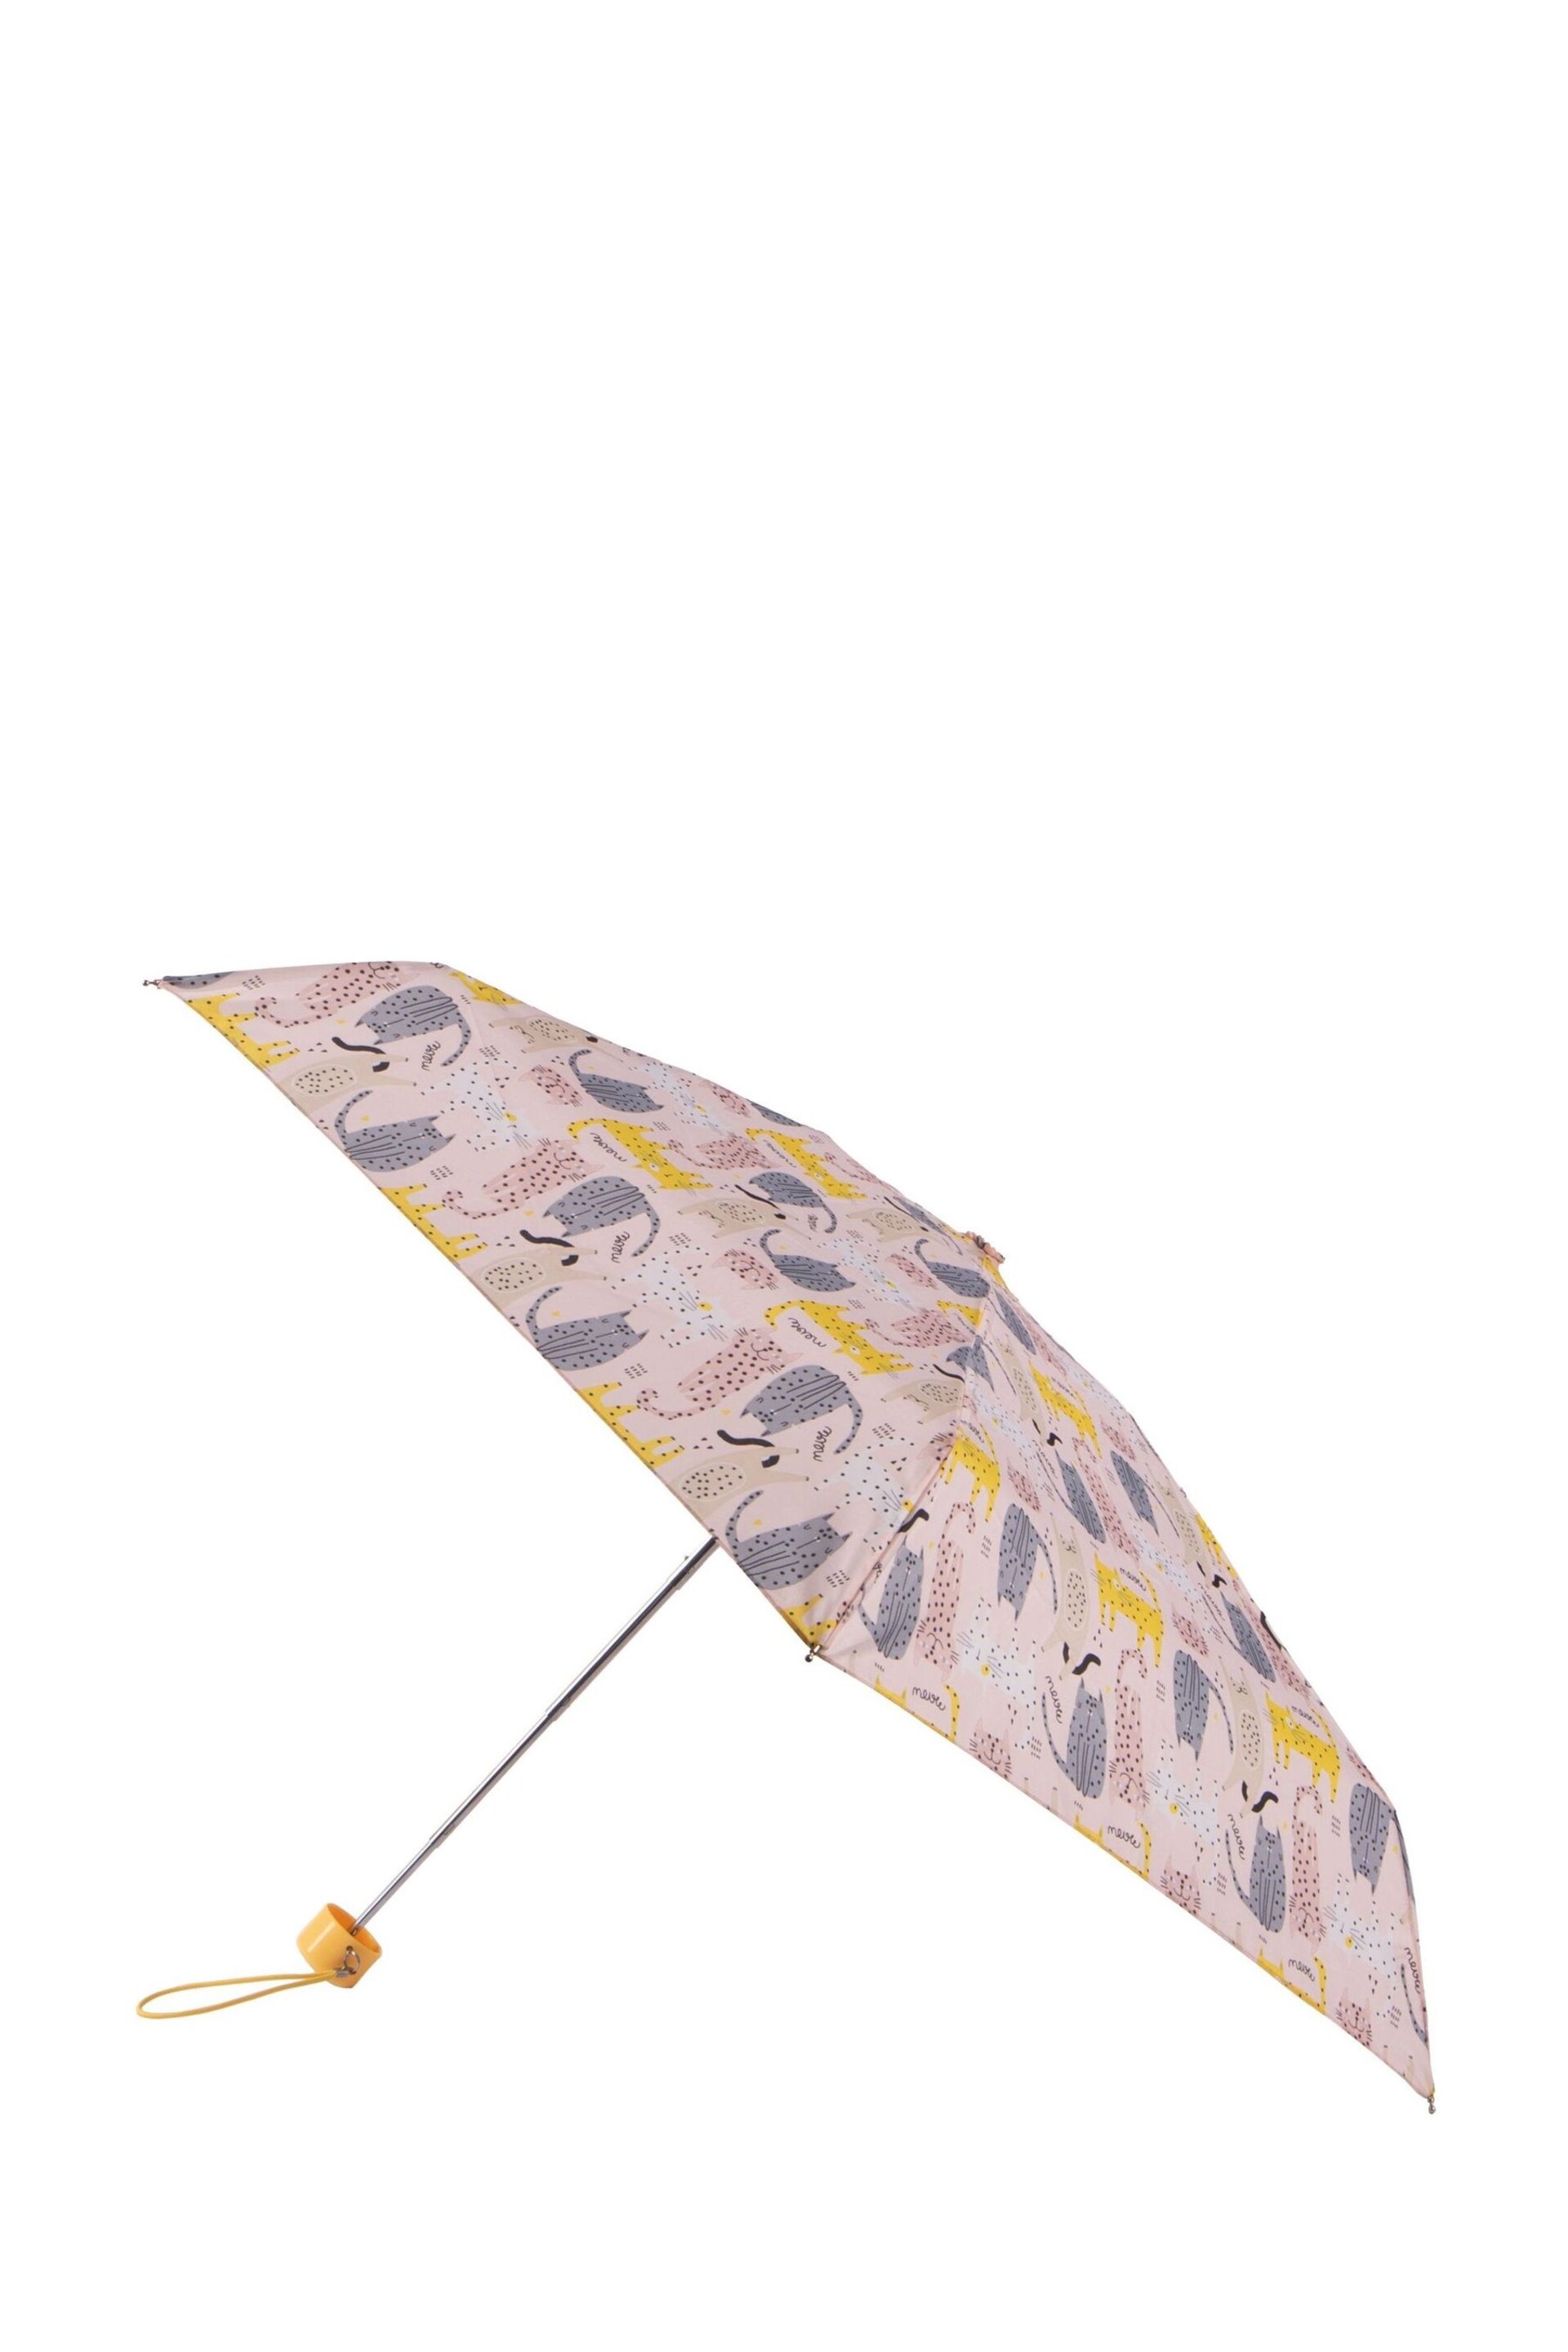 Totes Pink Eco Compact Round Dotty Cats Umbrella - Image 4 of 4